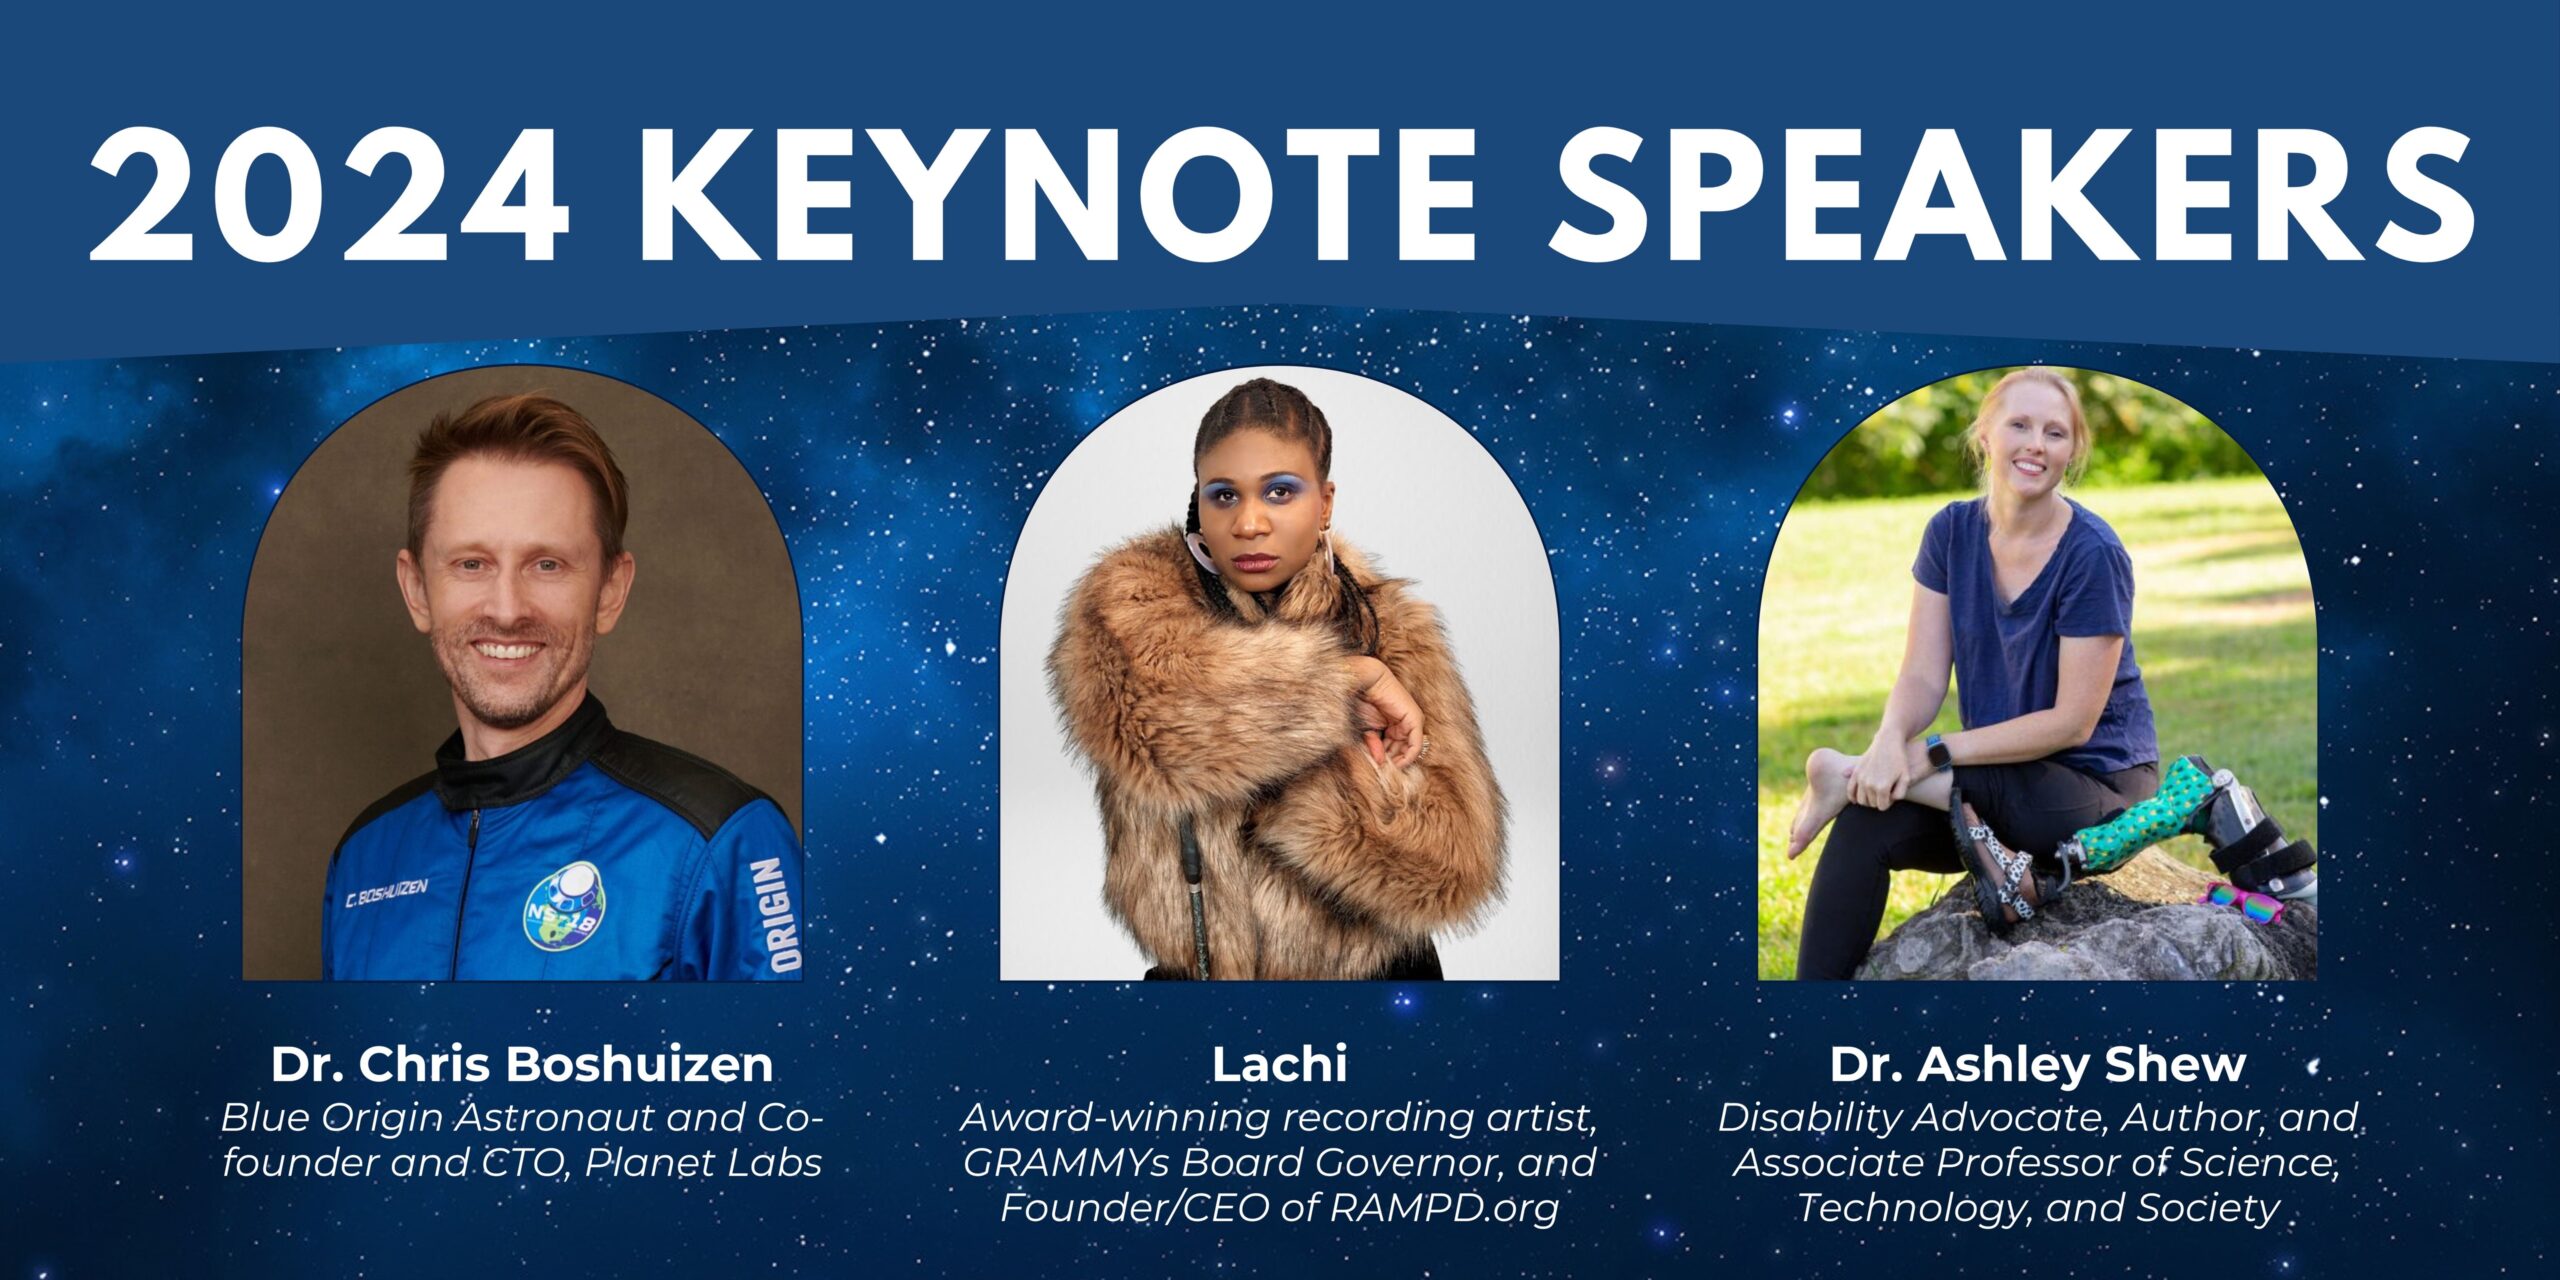 2024 Keynote Speakers featuring smiling images of Dr. Chris Boshuizen, Lachi, and Dr. Ashley Shew